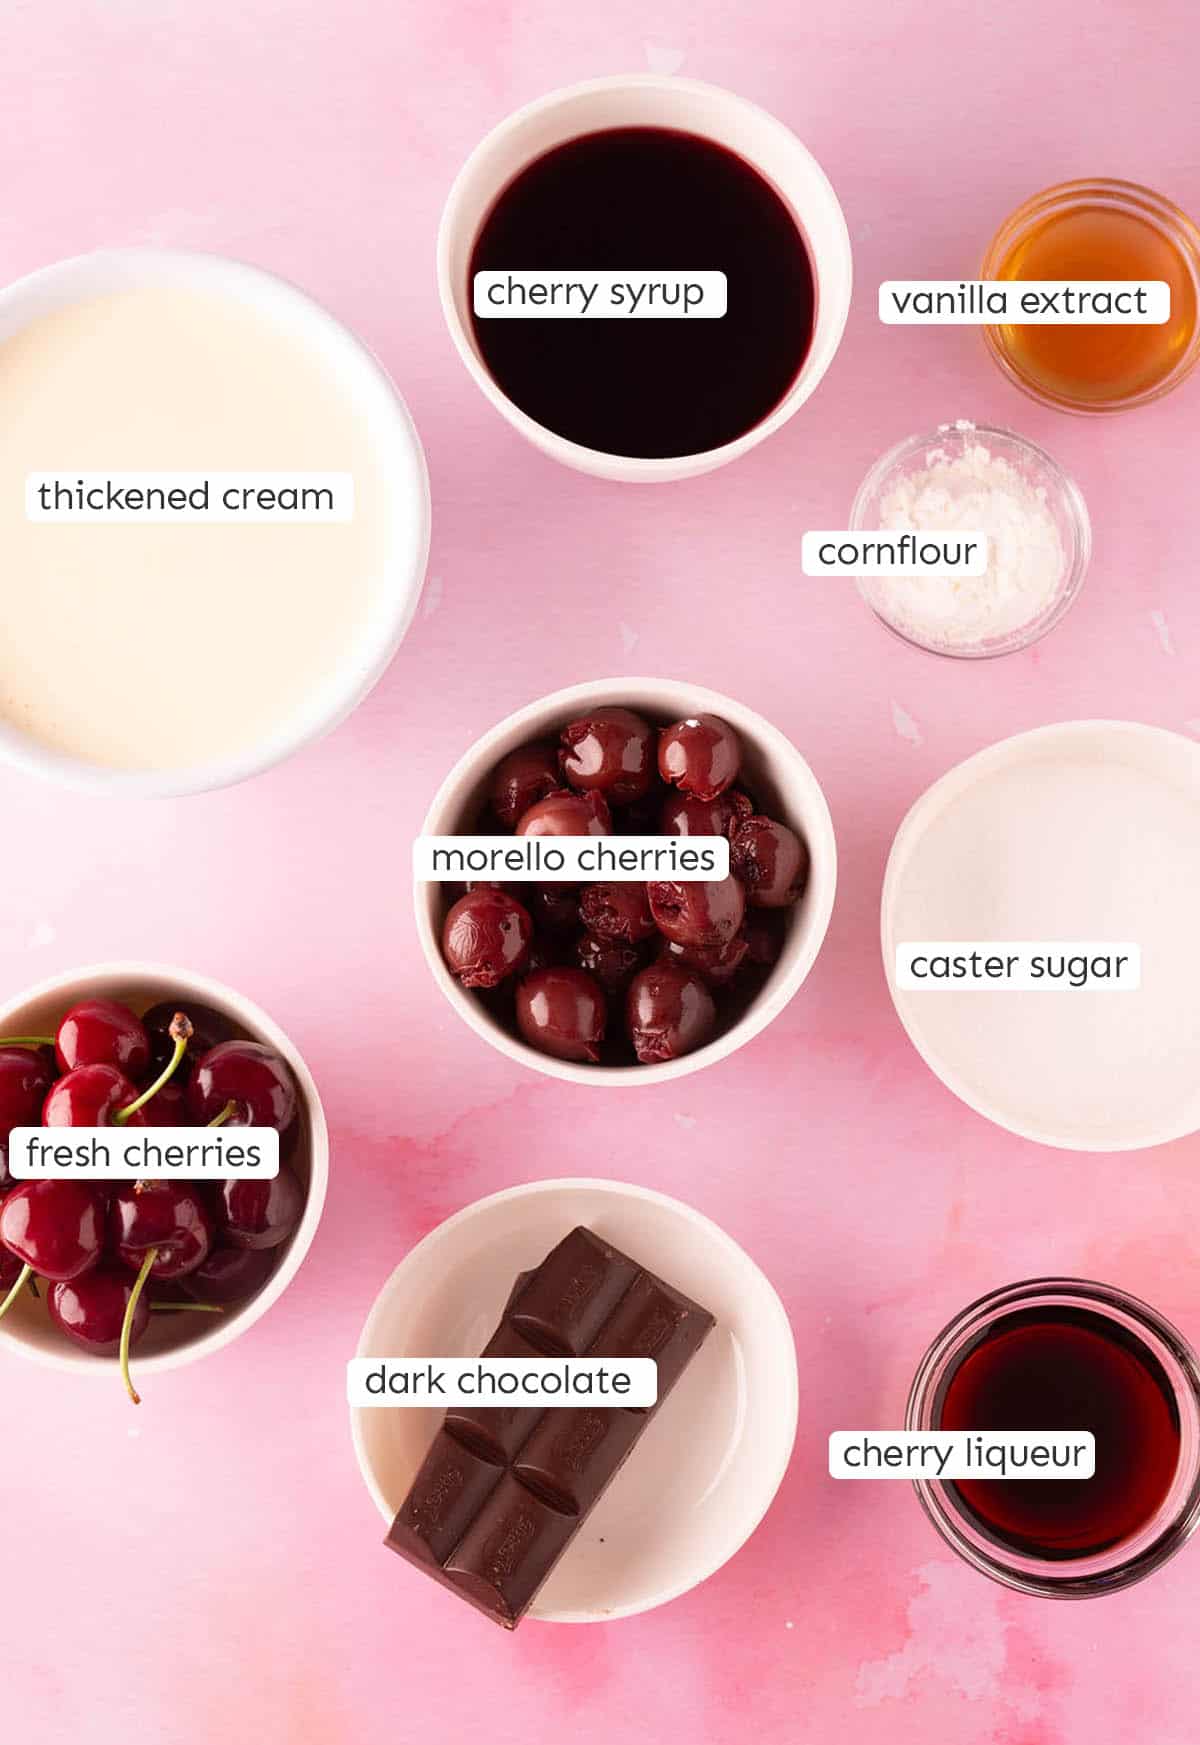 All the ingredients needed to make cherry syrup and whipped cream.